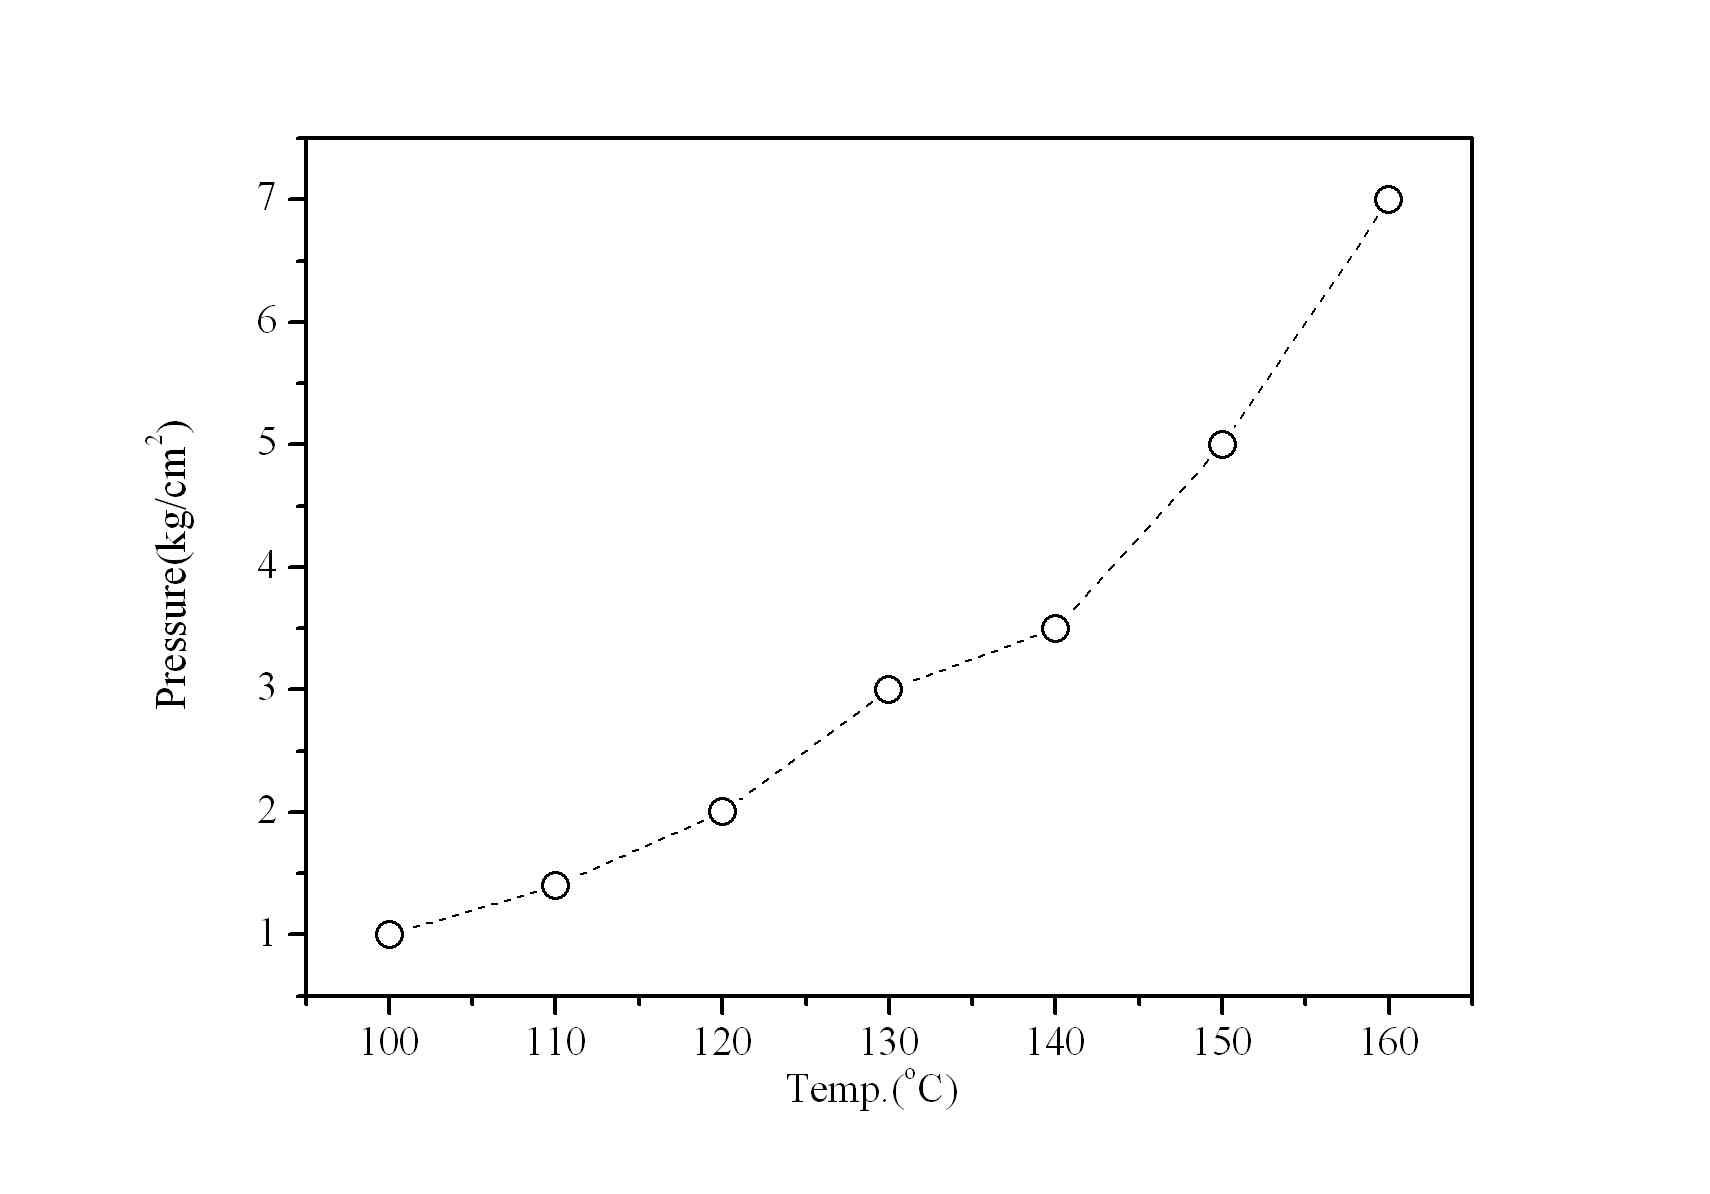 Pressure as a function of temperature in pilot-line.